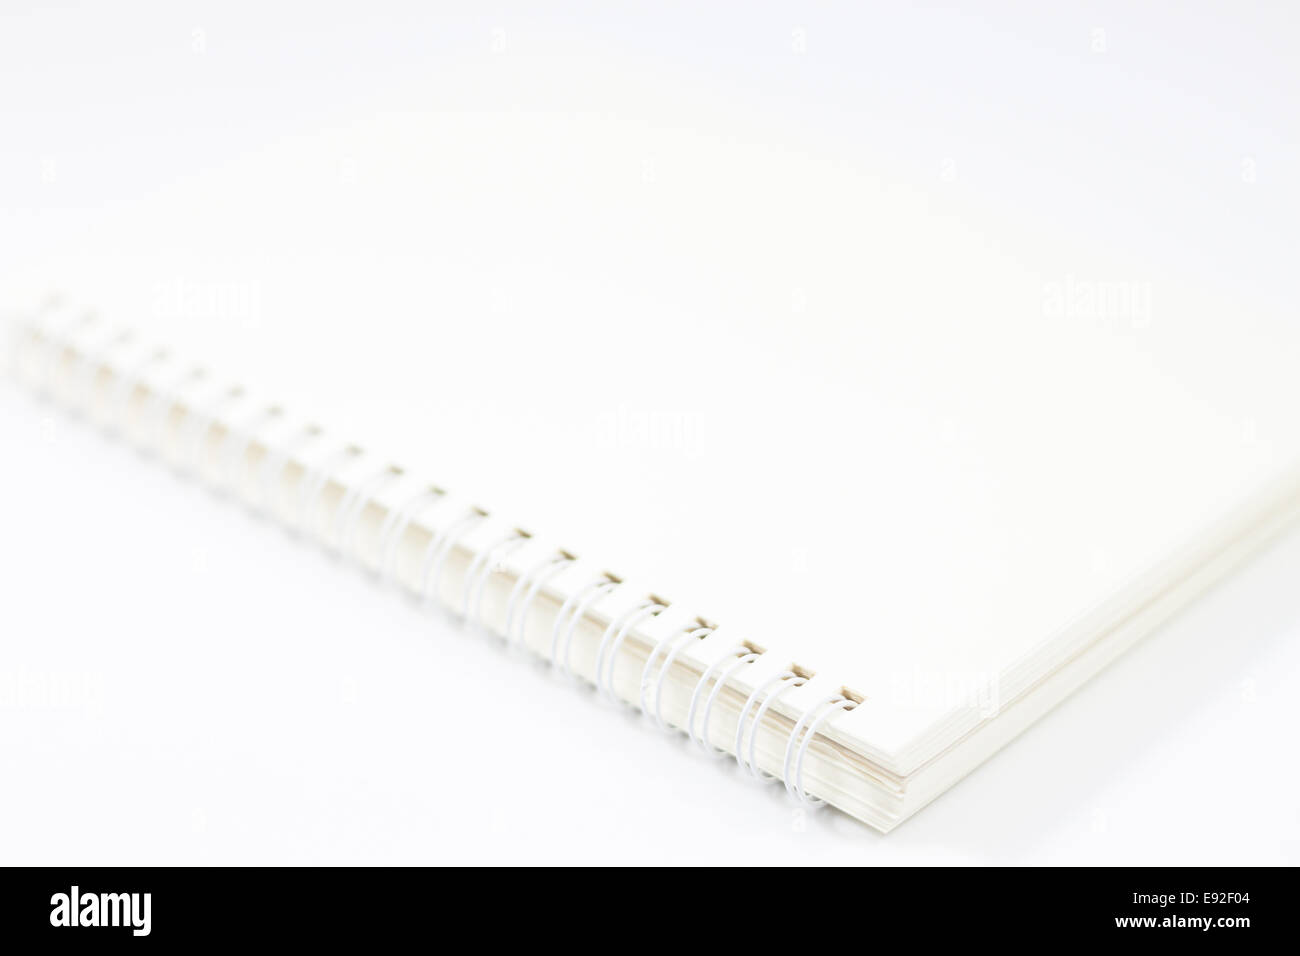 Spiral notebook isolated on white background, stock photo Stock Photo